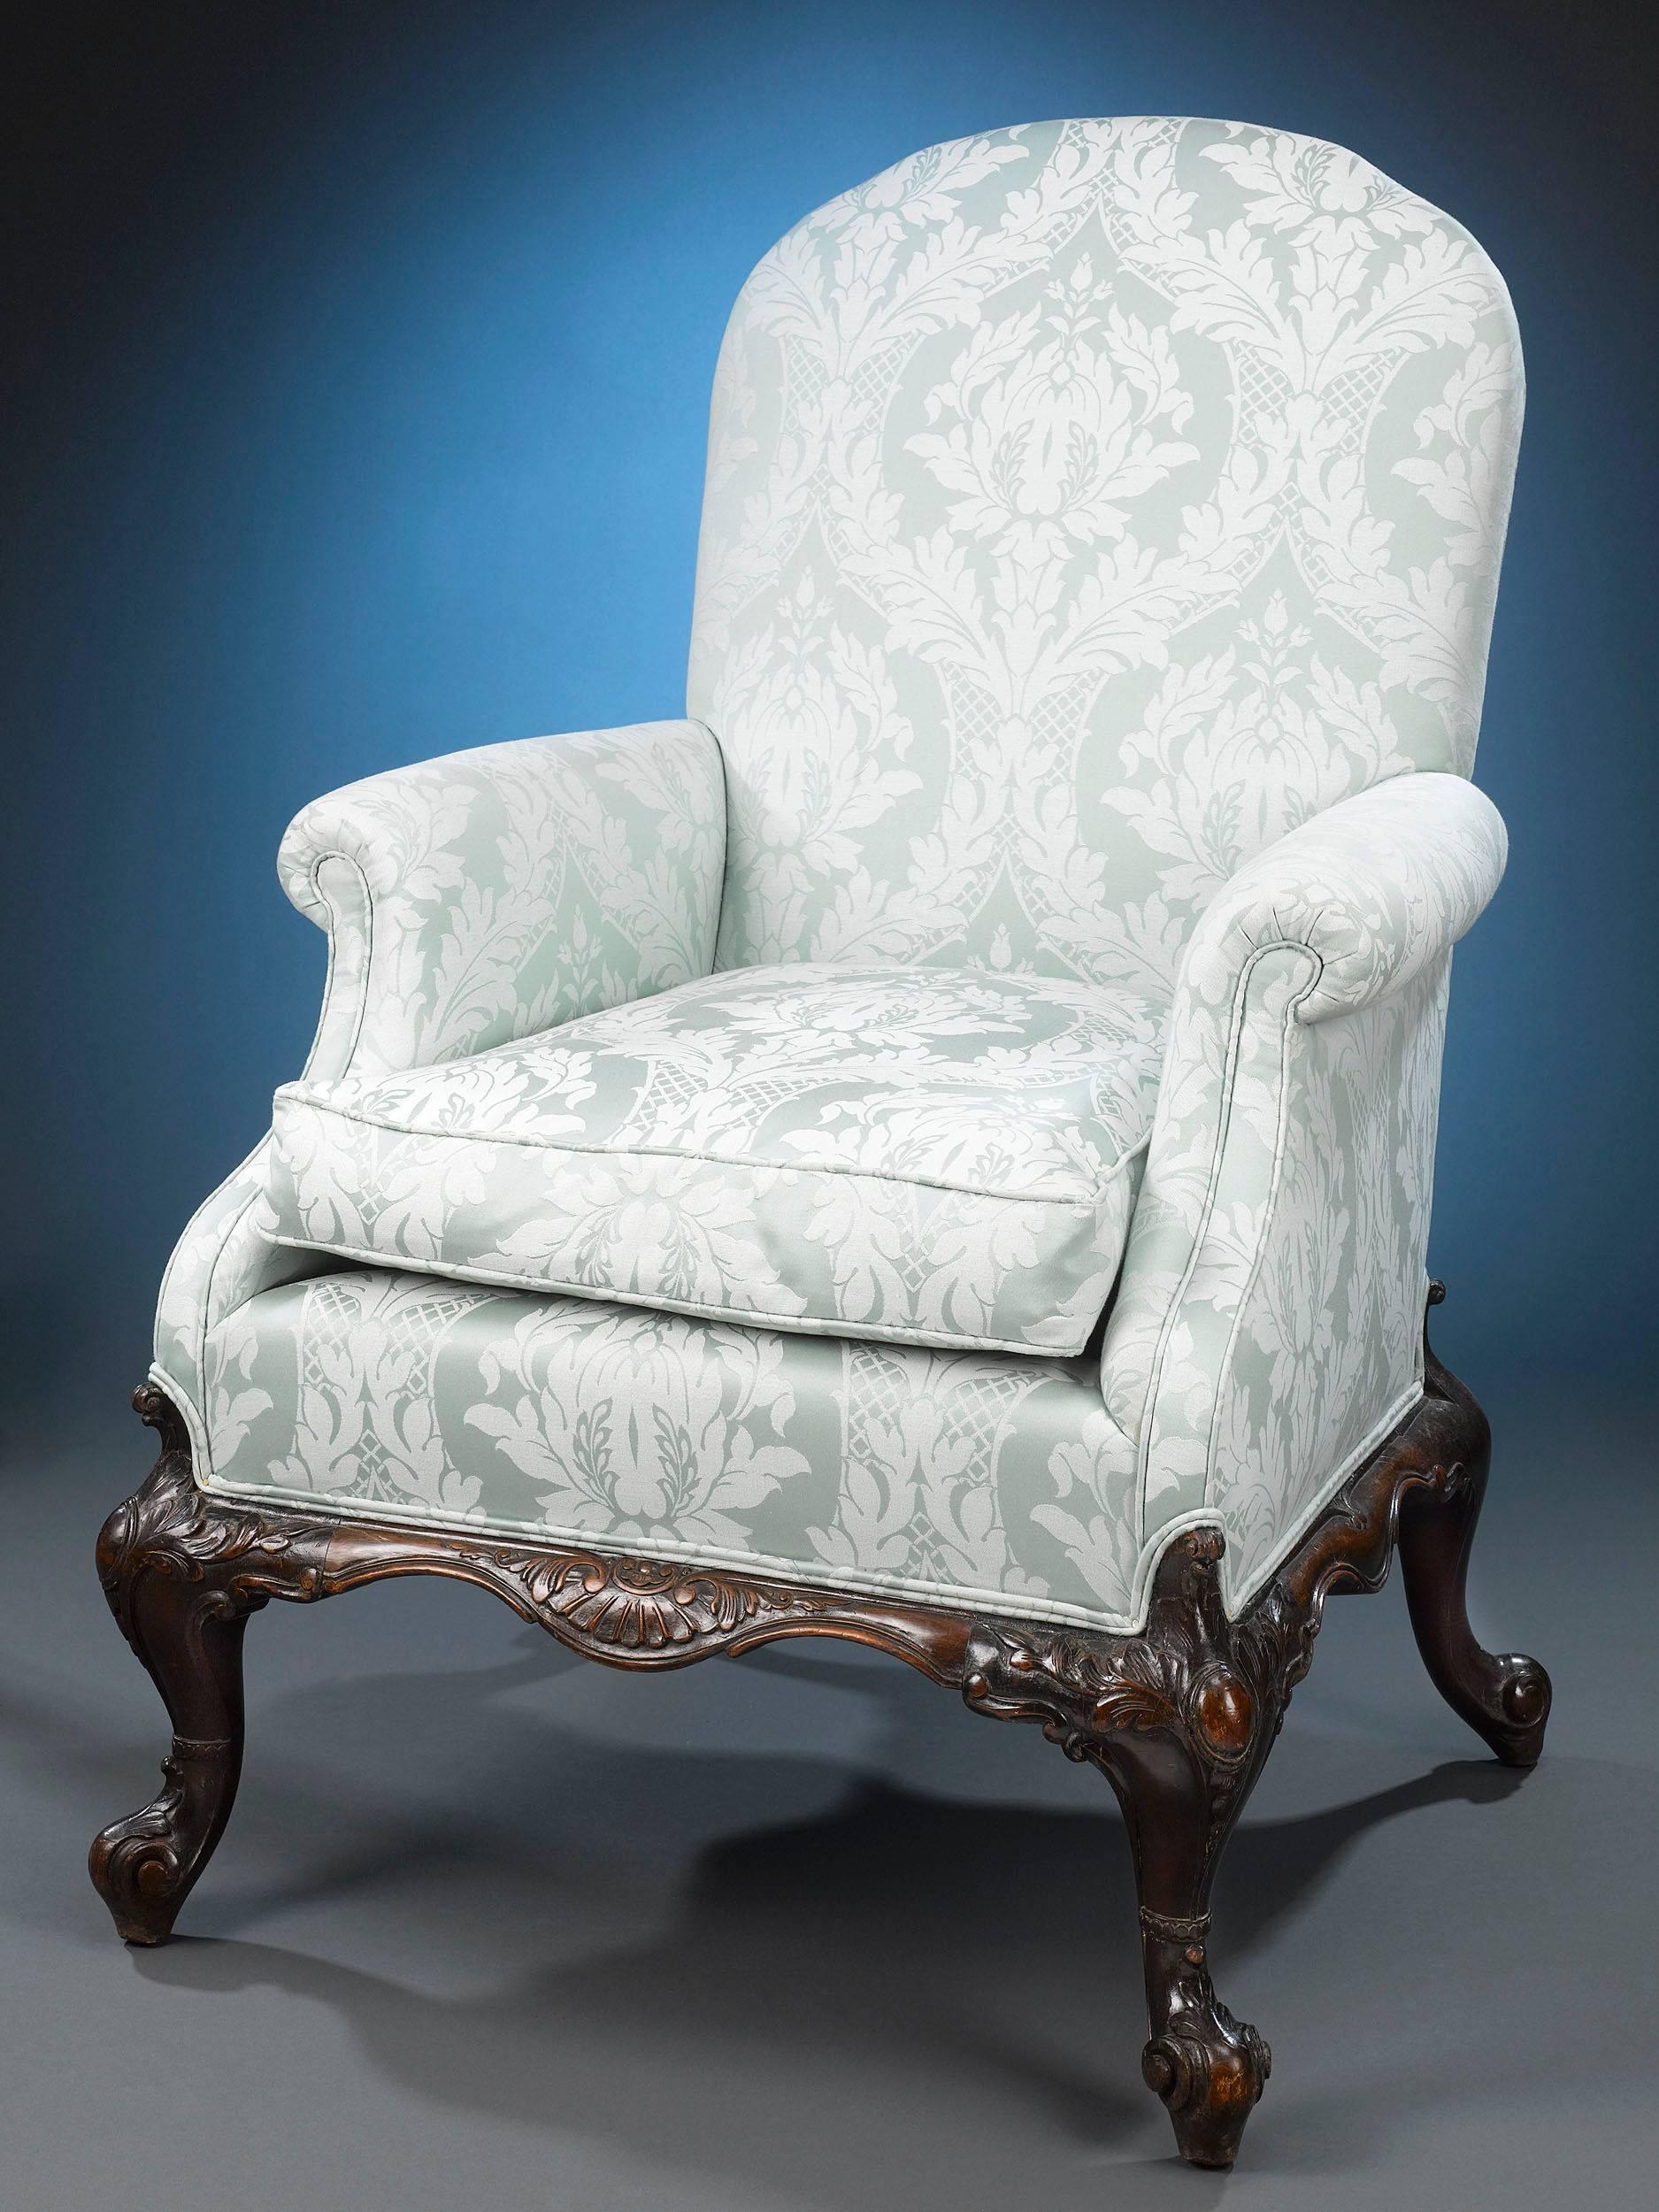 This Classic and highly desirable pair of George II-style armchairs is crafted of luxurious Cuban mahogany. Their large, yet elegant design is bolstered by beautifully upholstered arms, seats and backs, and fully carved cabriole legs reminiscent of